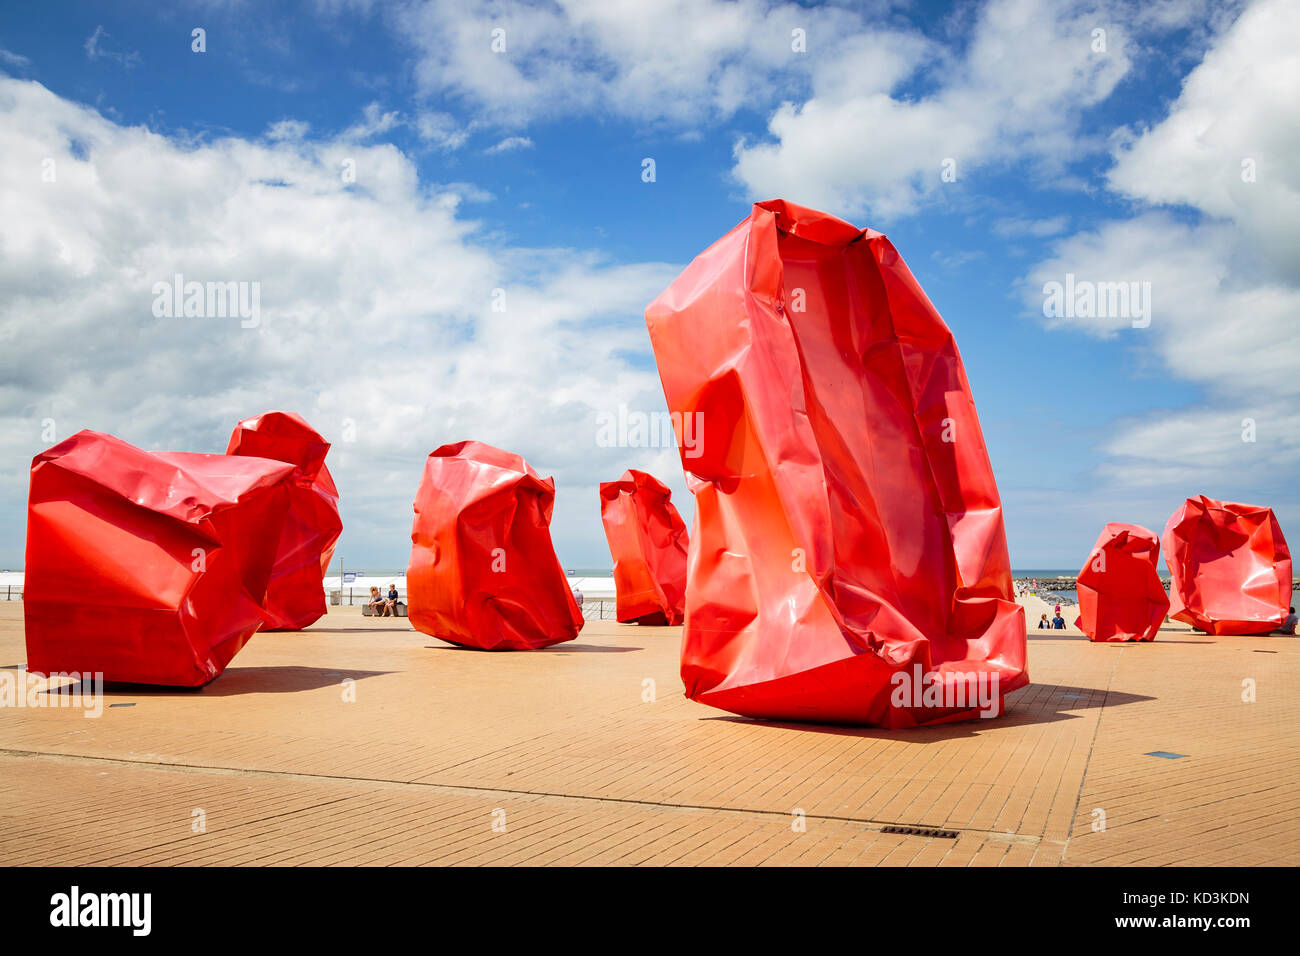 Wide picture of 'Rock Strangers' artwork in a sunny day with clouds. Oostende, Belgium. Stock Photo